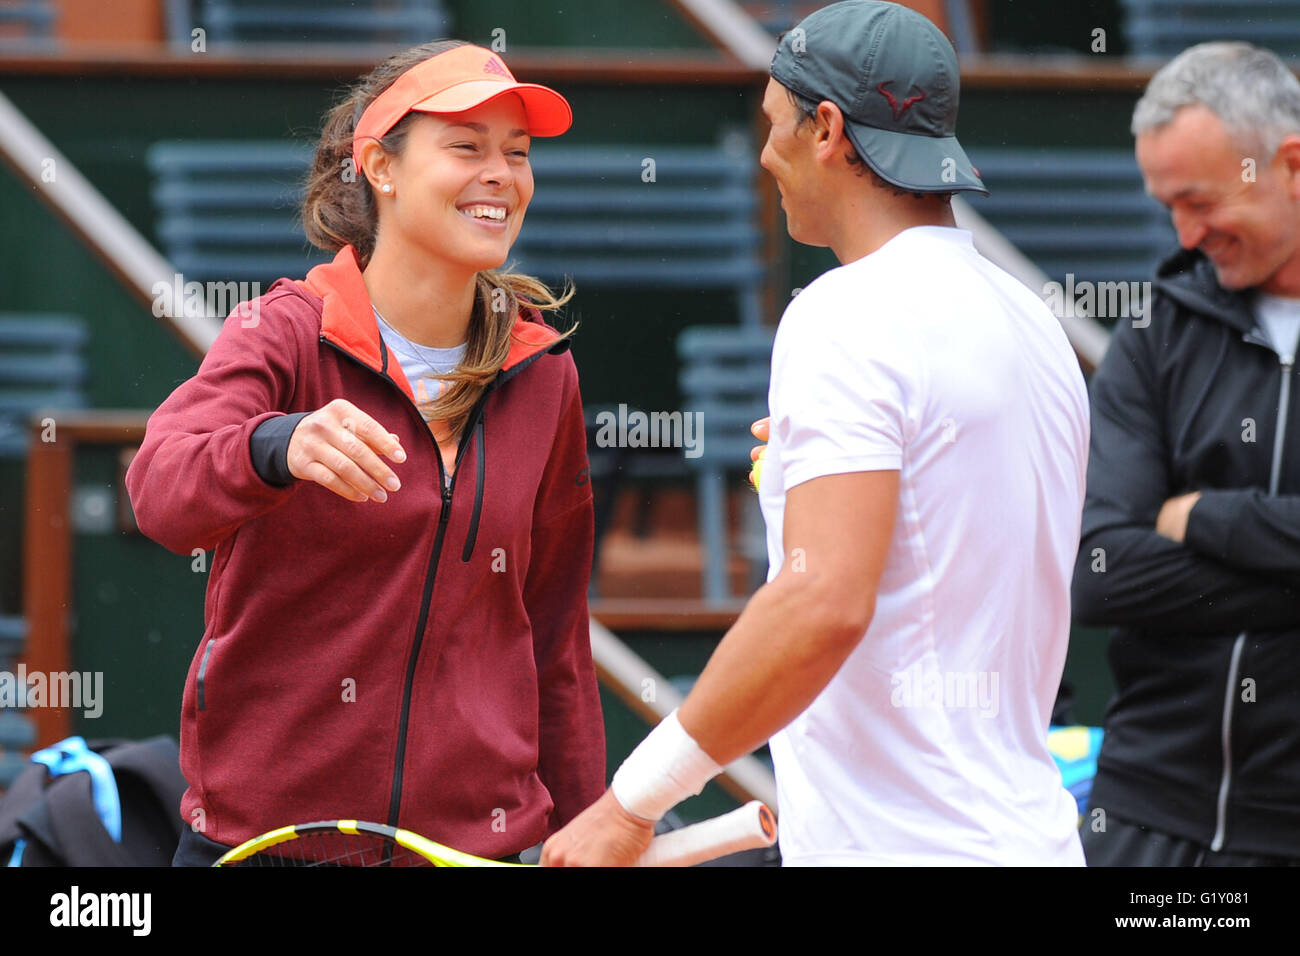 18 05 2016 Roland Garros Stadium Paris France French Open Tennis Championships Players Arrive For Practise And Qualifying Days Rafael Nadal Esp Greets Ana Ivanovic Ser Stock Photo Alamy